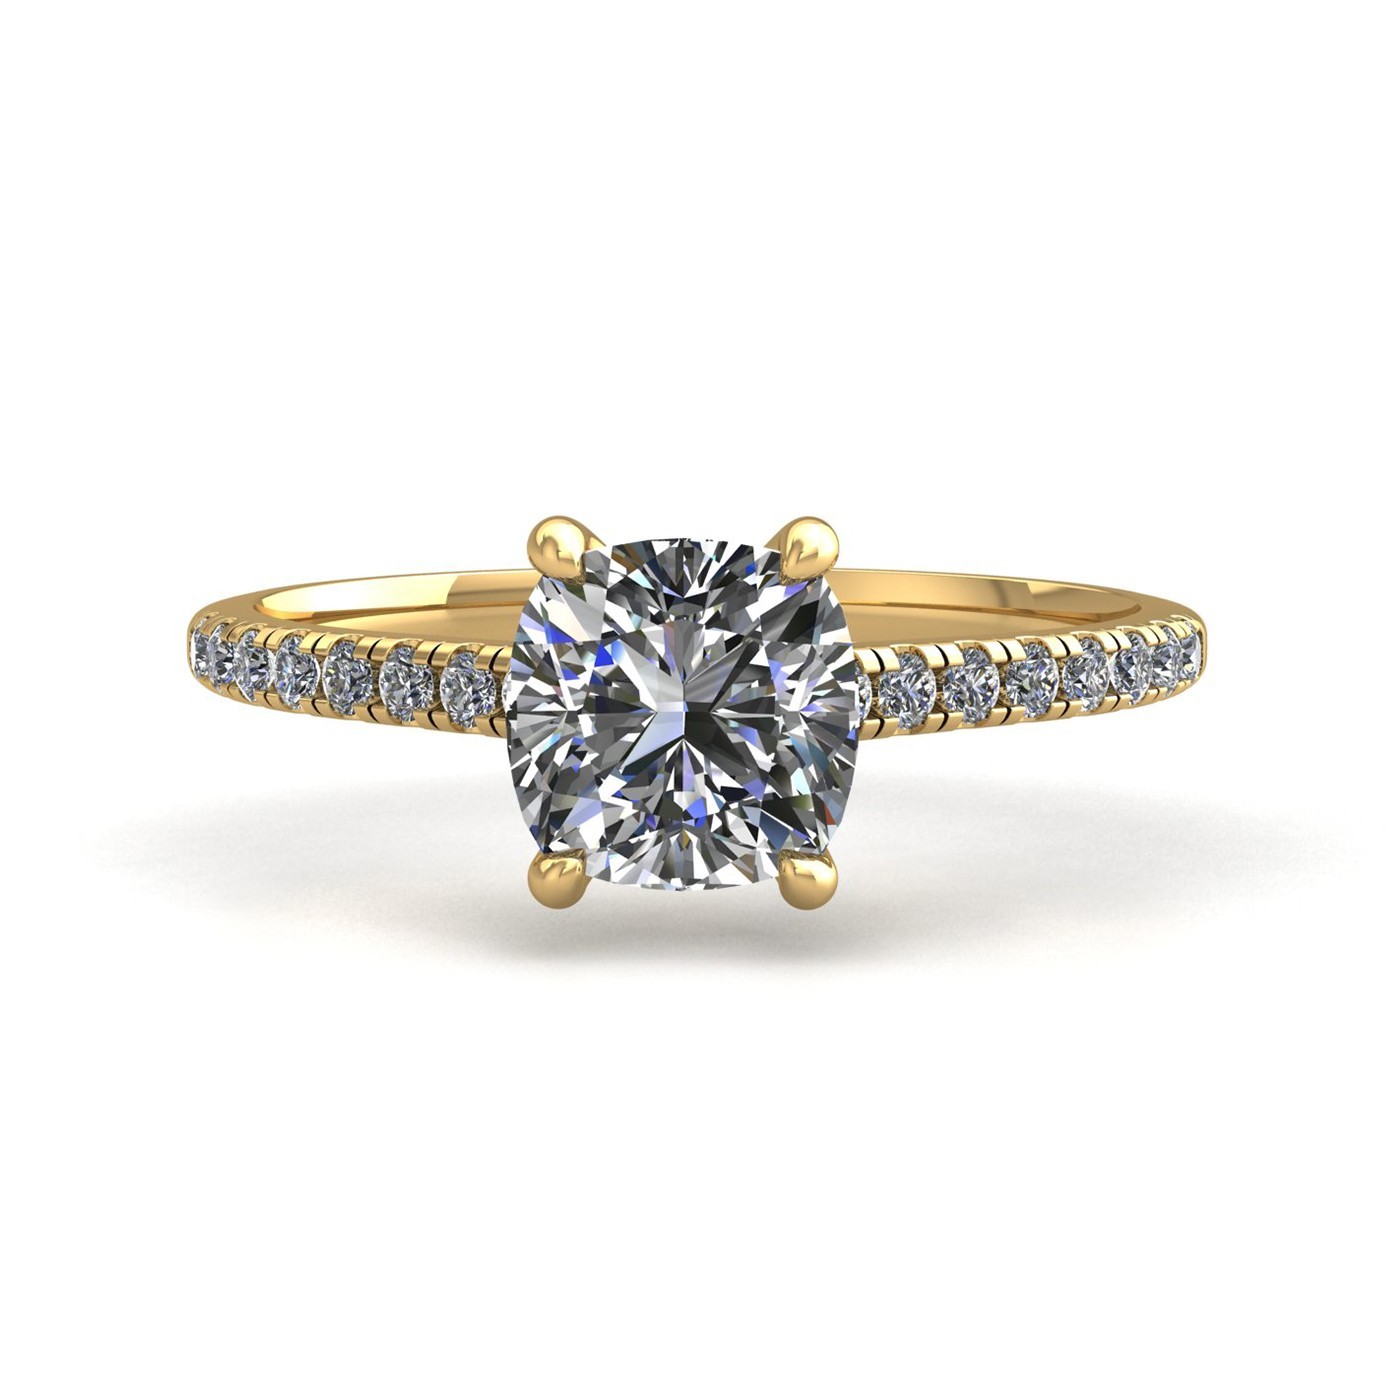 18k yellow gold 0,80 ct 4 prongs cushion cut diamond engagement ring with whisper thin pavÉ set band Photos & images